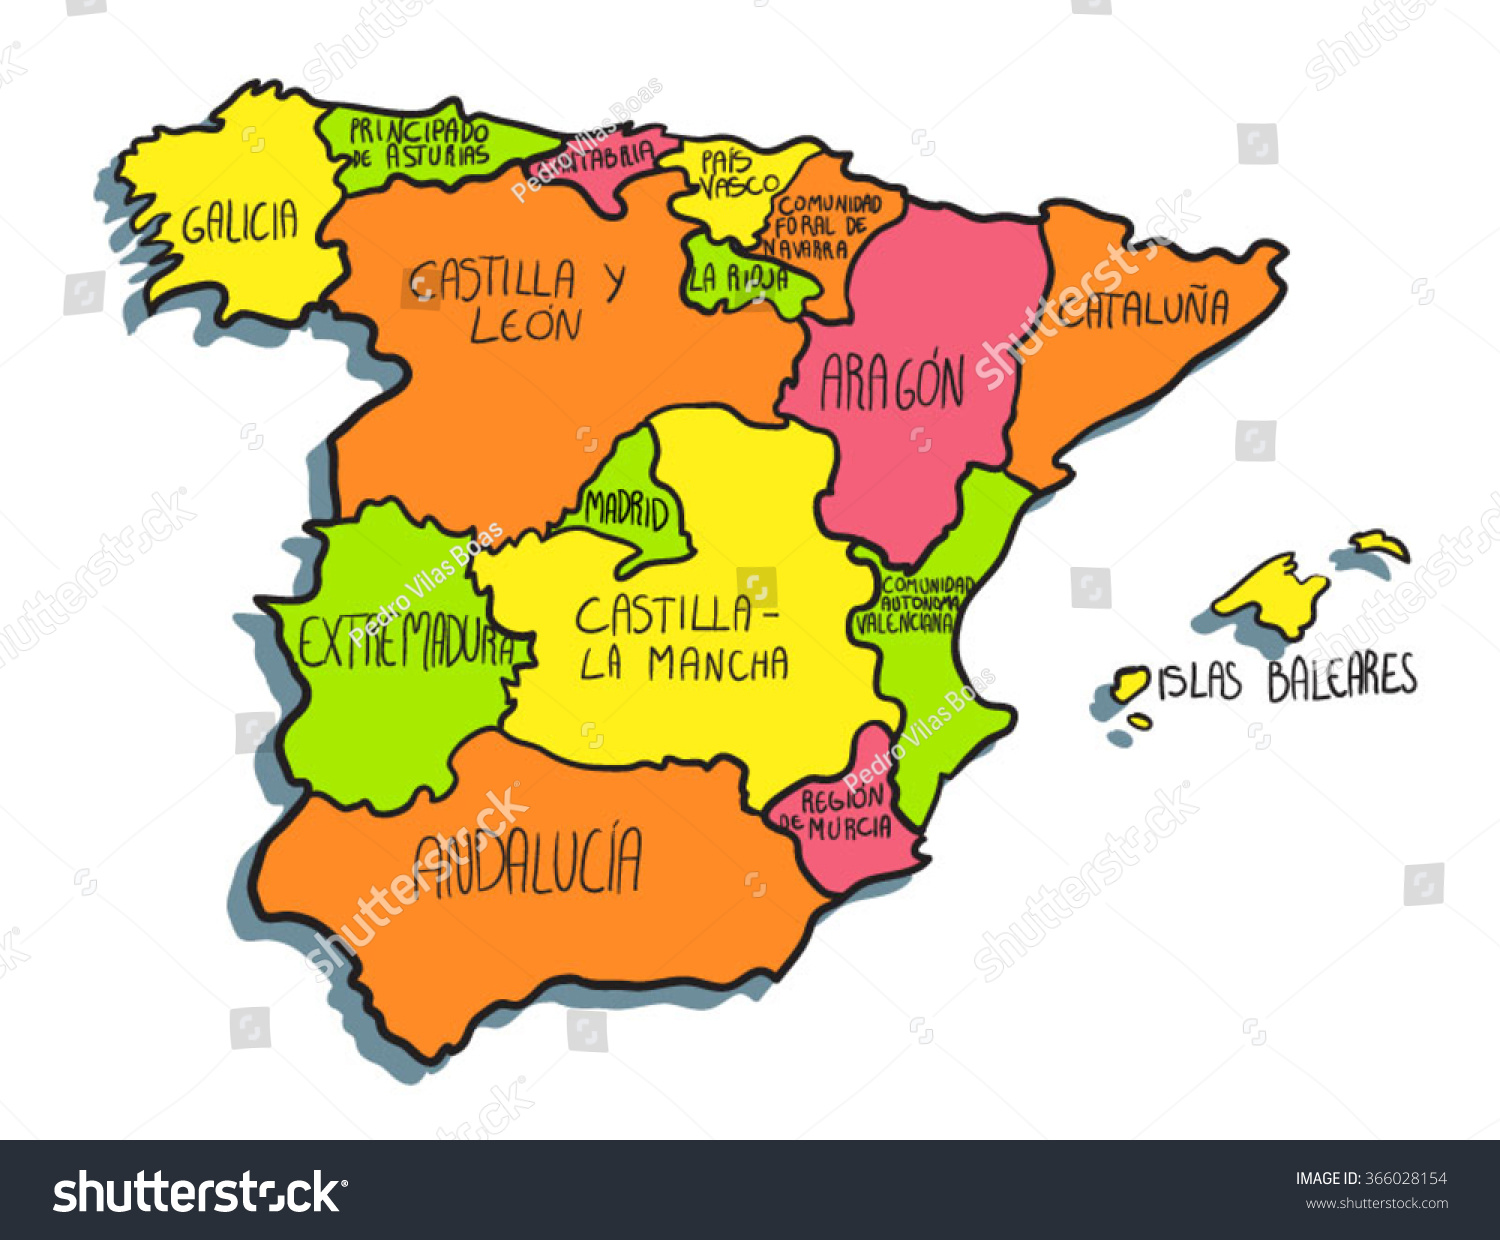 clipart map of spain - photo #17